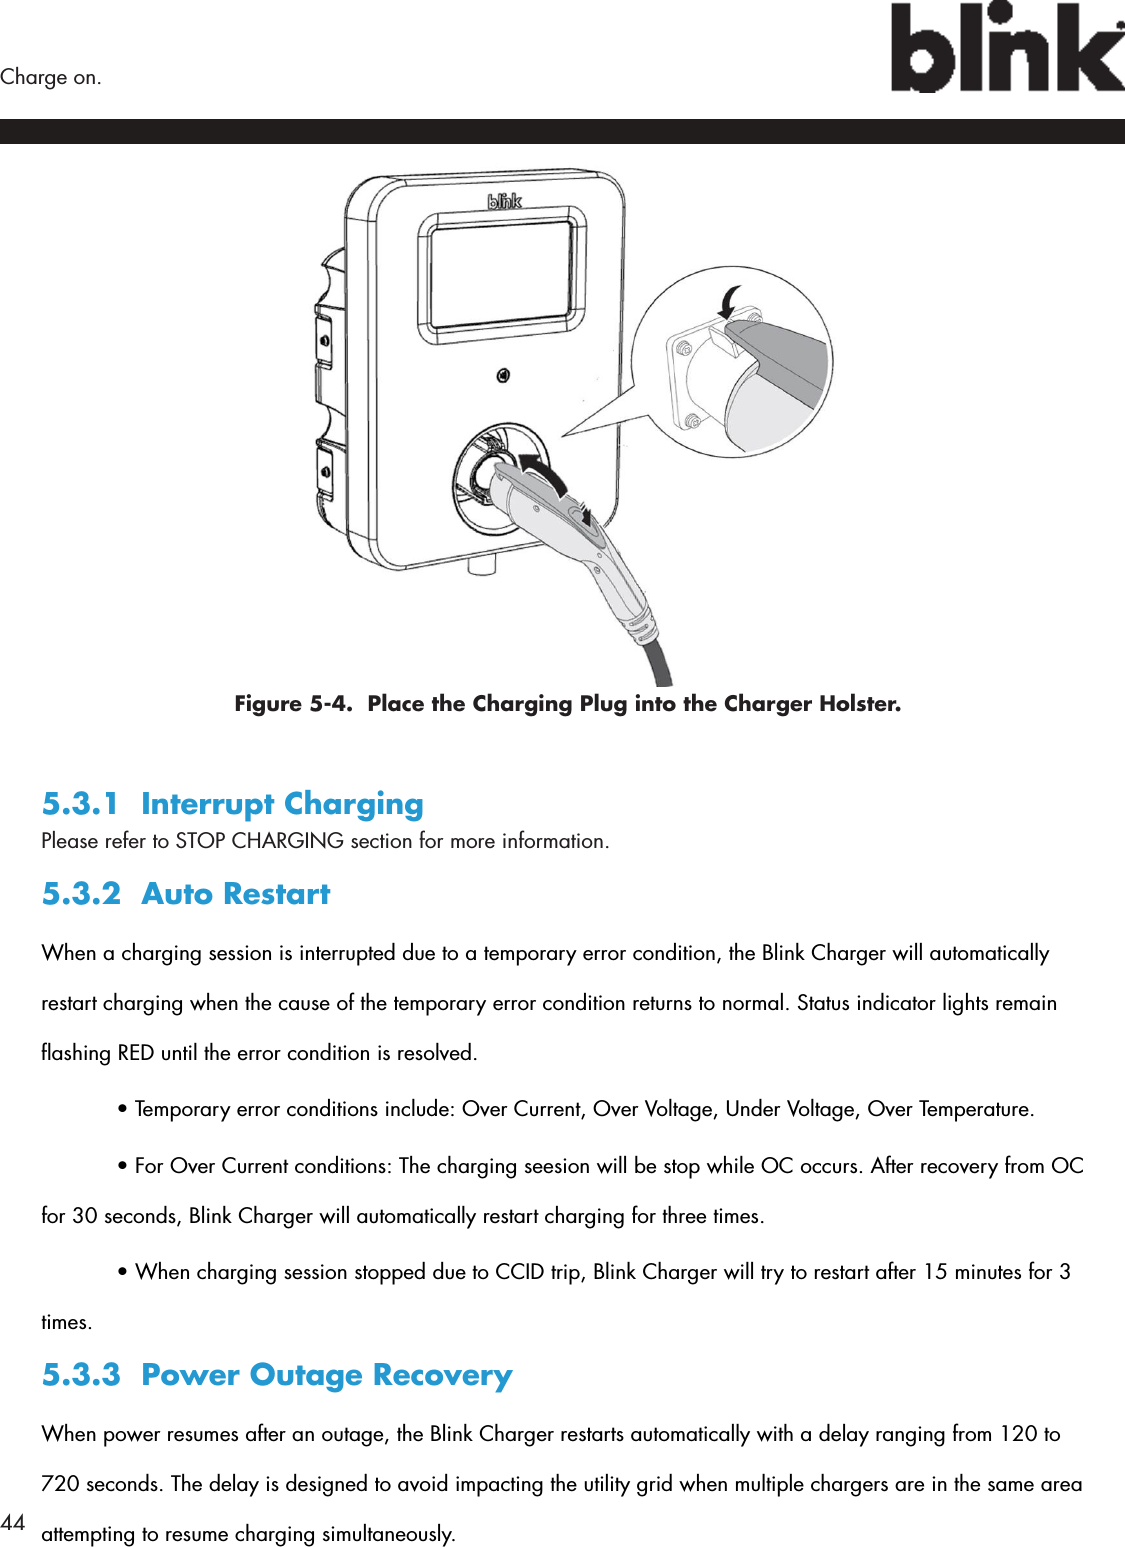 44  Charge on.Figure 5-4.  Place the Charging Plug into the Charger Holster.5.3.1  Interrupt ChargingPlease refer to STOP CHARGING section for more information.5.3.2  Auto RestartWhen a charging session is interrupted due to a temporary error condition, the Blink Charger will automatically restart charging when the cause of the temporary error condition returns to normal. Status indicator lights remain ashing RED until the error condition is resolved.  • Temporary error conditions include: Over Current, Over Voltage, Under Voltage, Over Temperature.  • For Over Current conditions: The charging seesion will be stop while OC occurs. After recovery from OC for 30 seconds, Blink Charger will automatically restart charging for three times.  • When charging session stopped due to CCID trip, Blink Charger will try to restart after 15 minutes for 3 times.5.3.3  Power Outage RecoveryWhen power resumes after an outage, the Blink Charger restarts automatically with a delay ranging from 120 to 720 seconds. The delay is designed to avoid impacting the utility grid when multiple chargers are in the same area attempting to resume charging simultaneously.